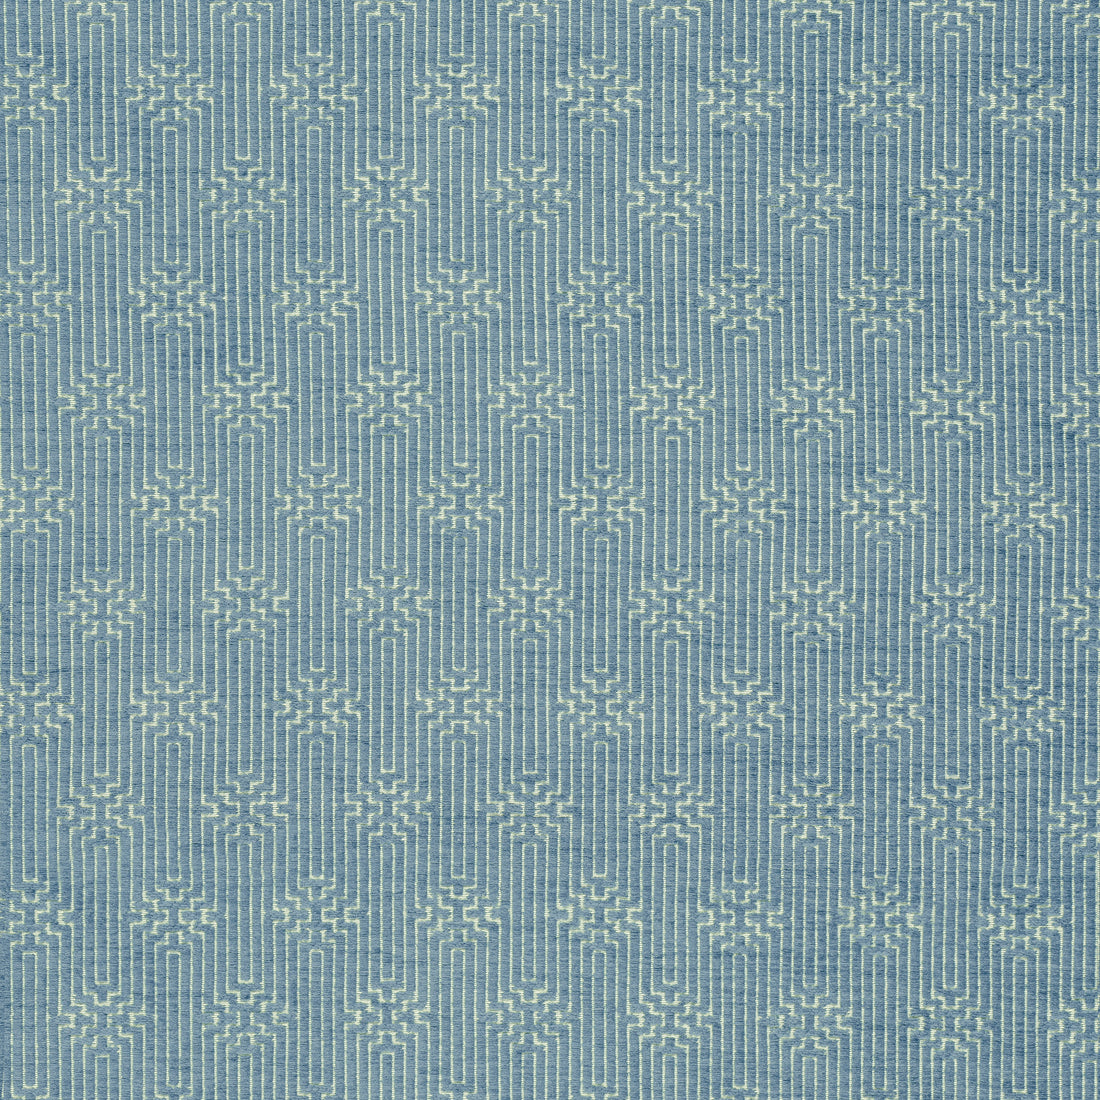 Crete fabric in slate color - pattern number W74214 - by Thibaut in the Passage collection